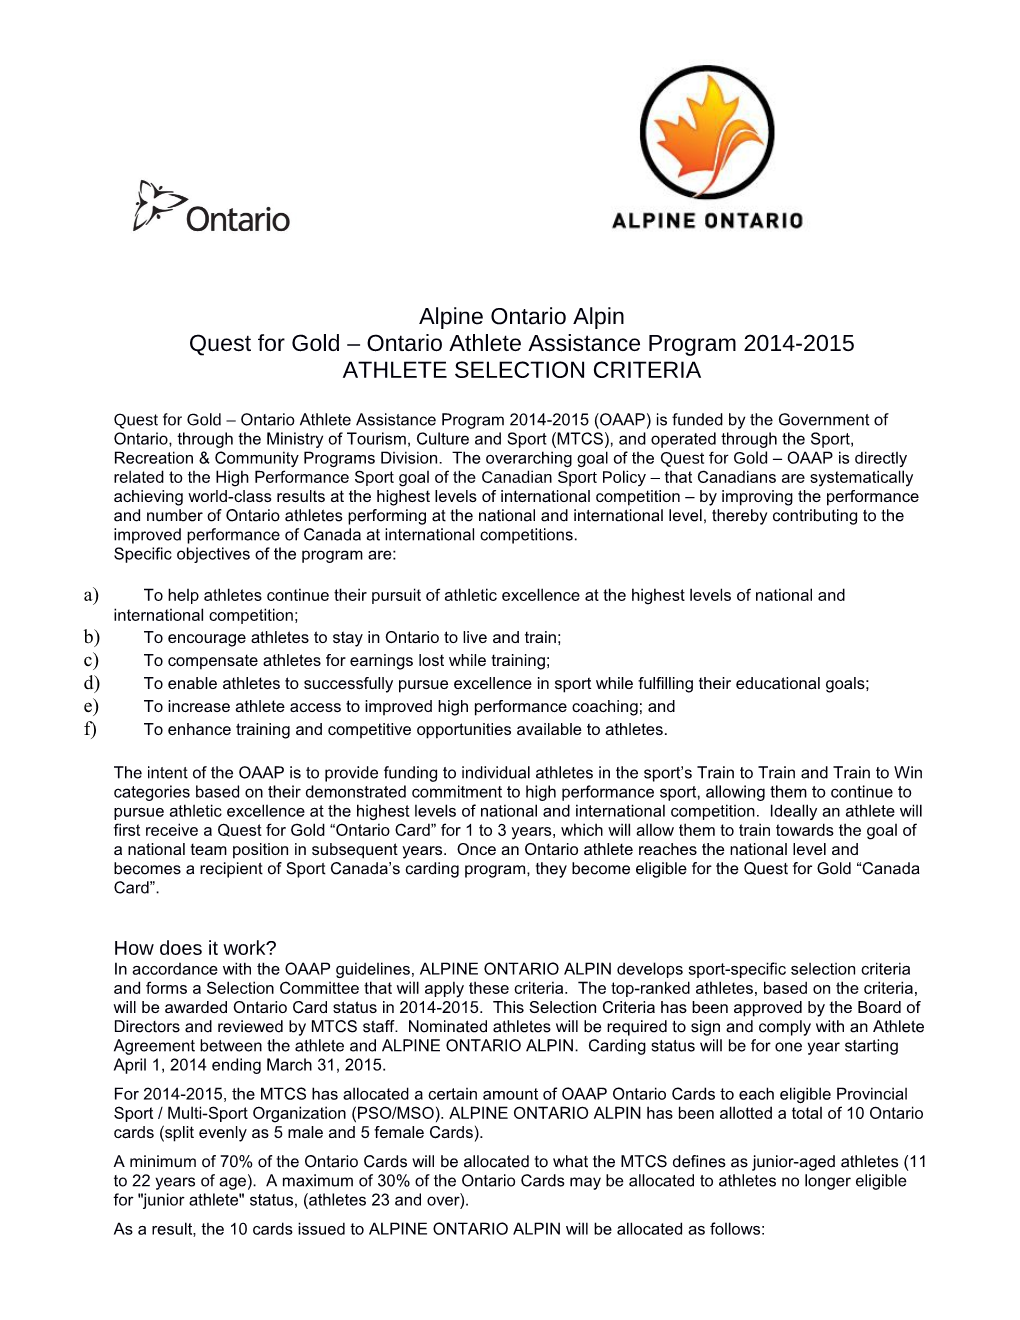 Quest for Gold Ontario Athlete Assistance Program 2014-2015